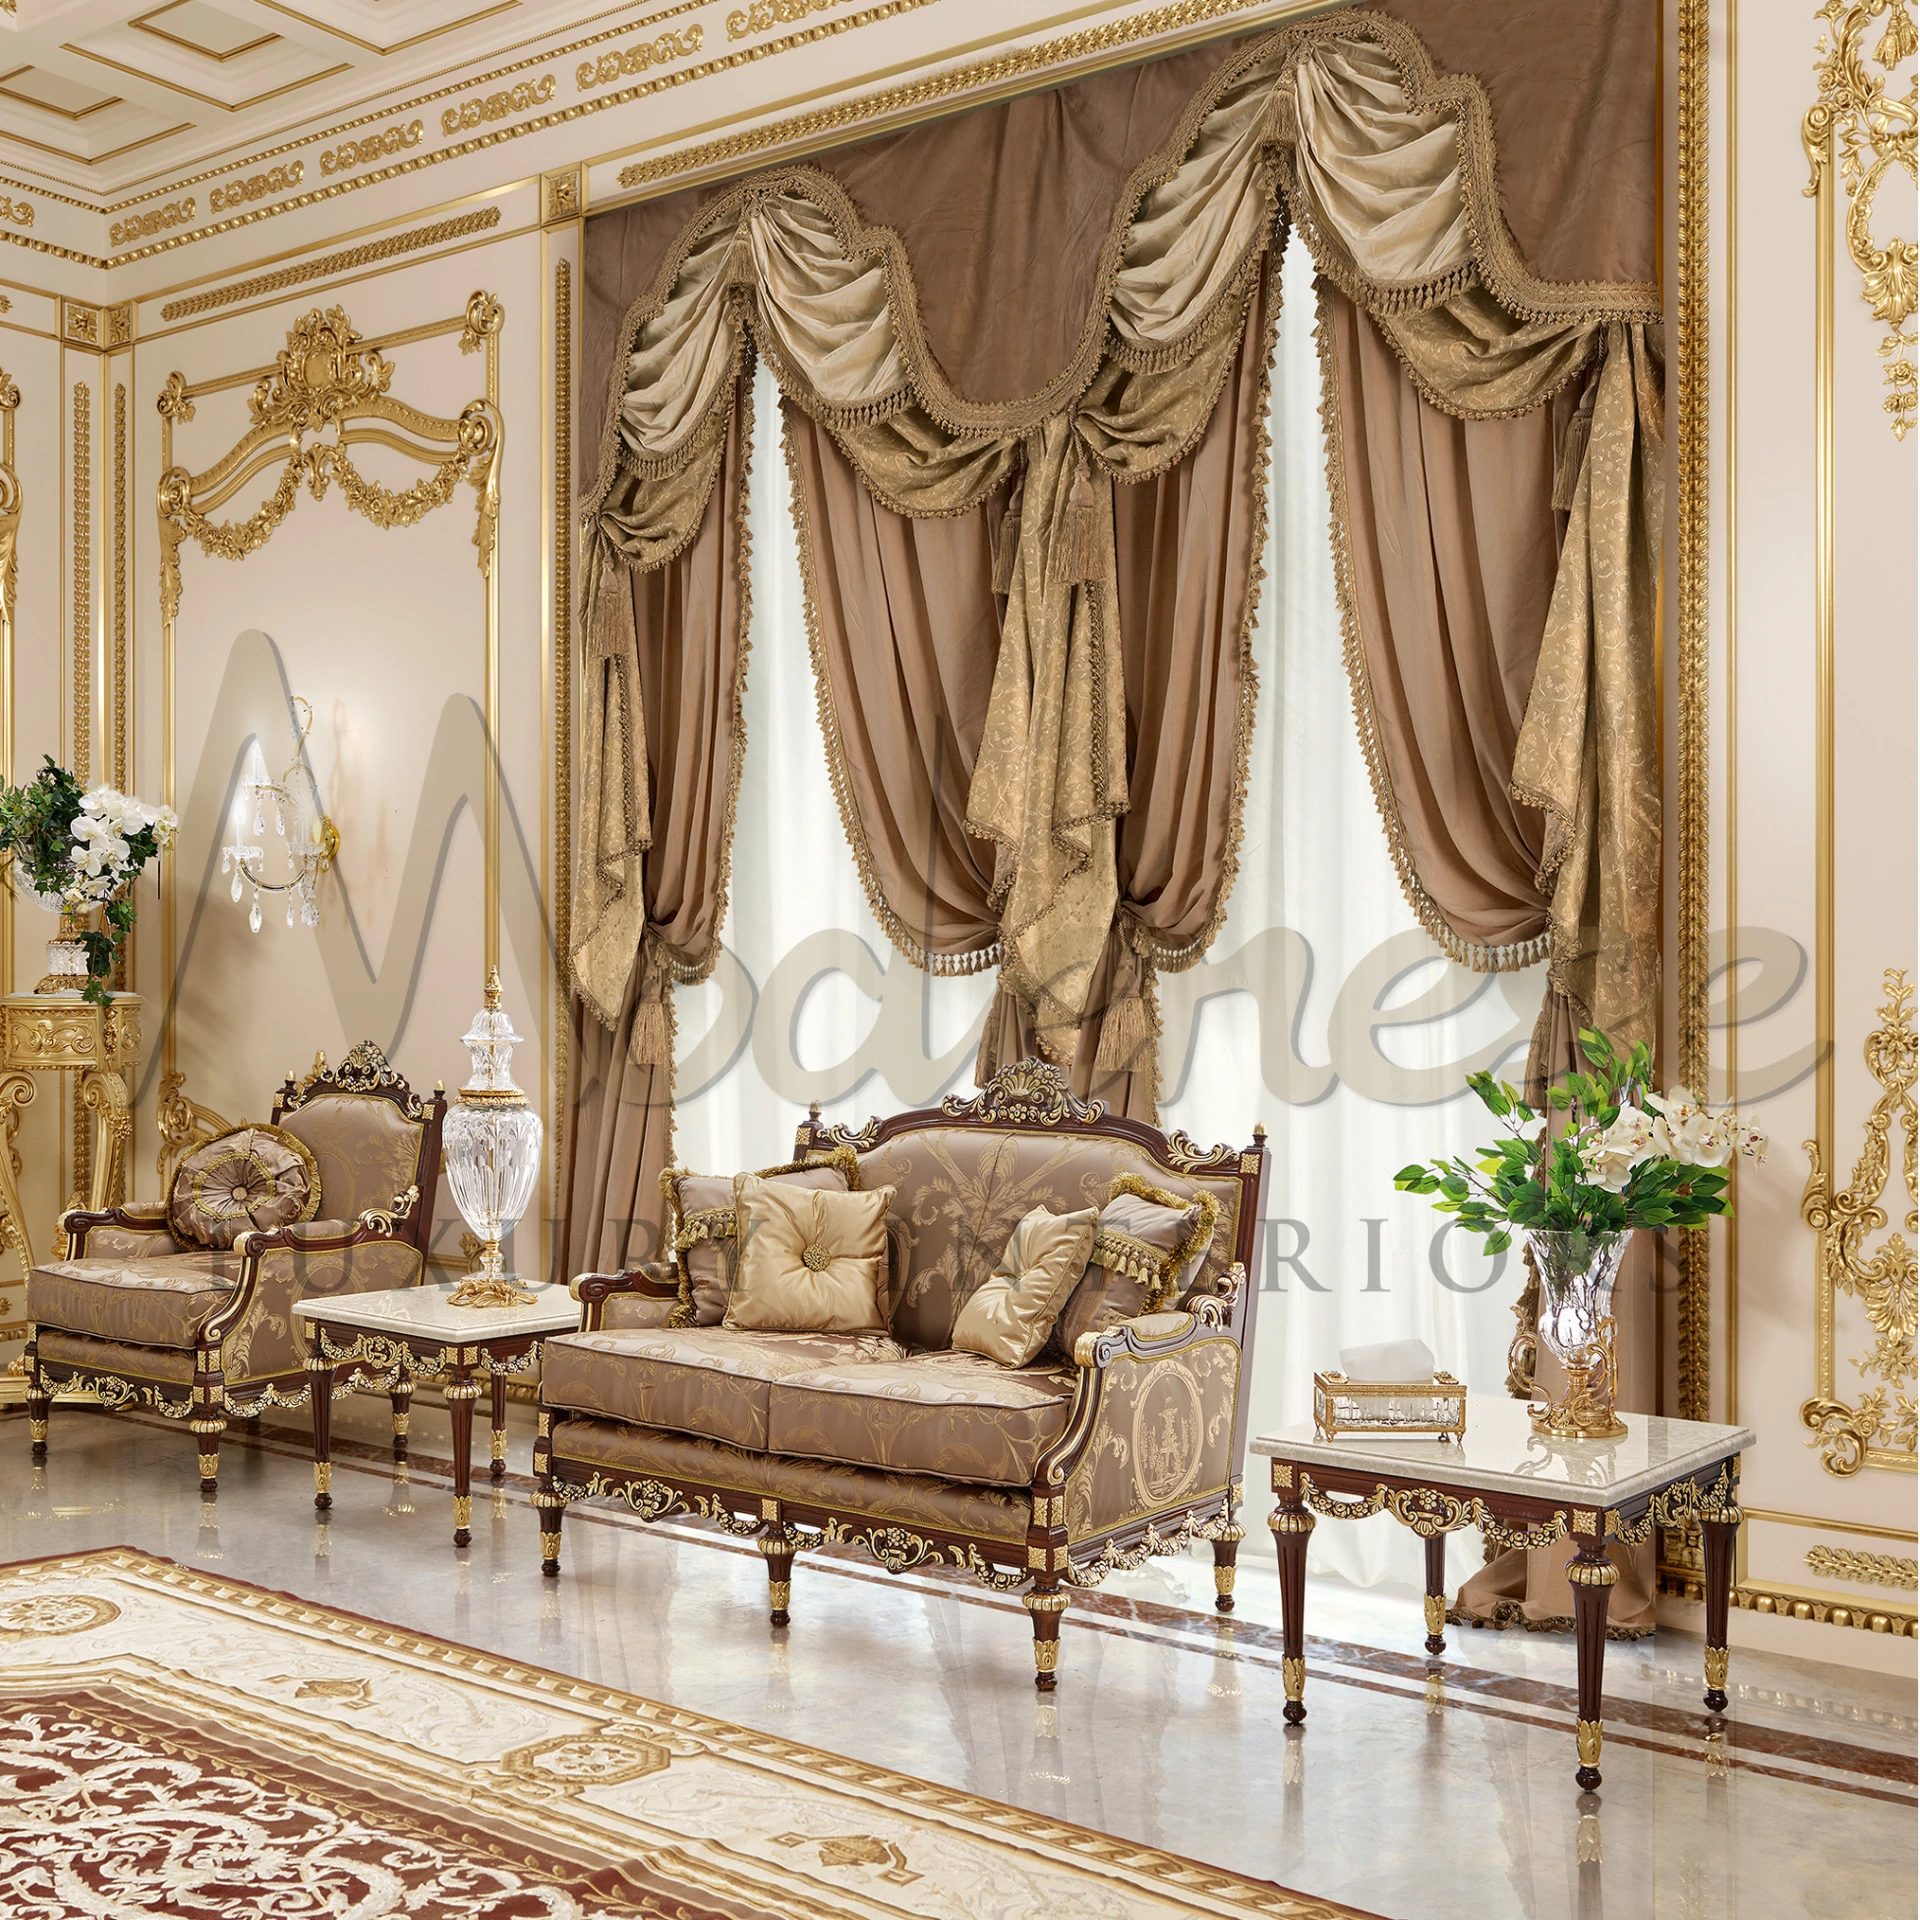 Opulent Baroque-style sofa with golden embellishments, Italian design, elevating classic collection and home aesthetics.
